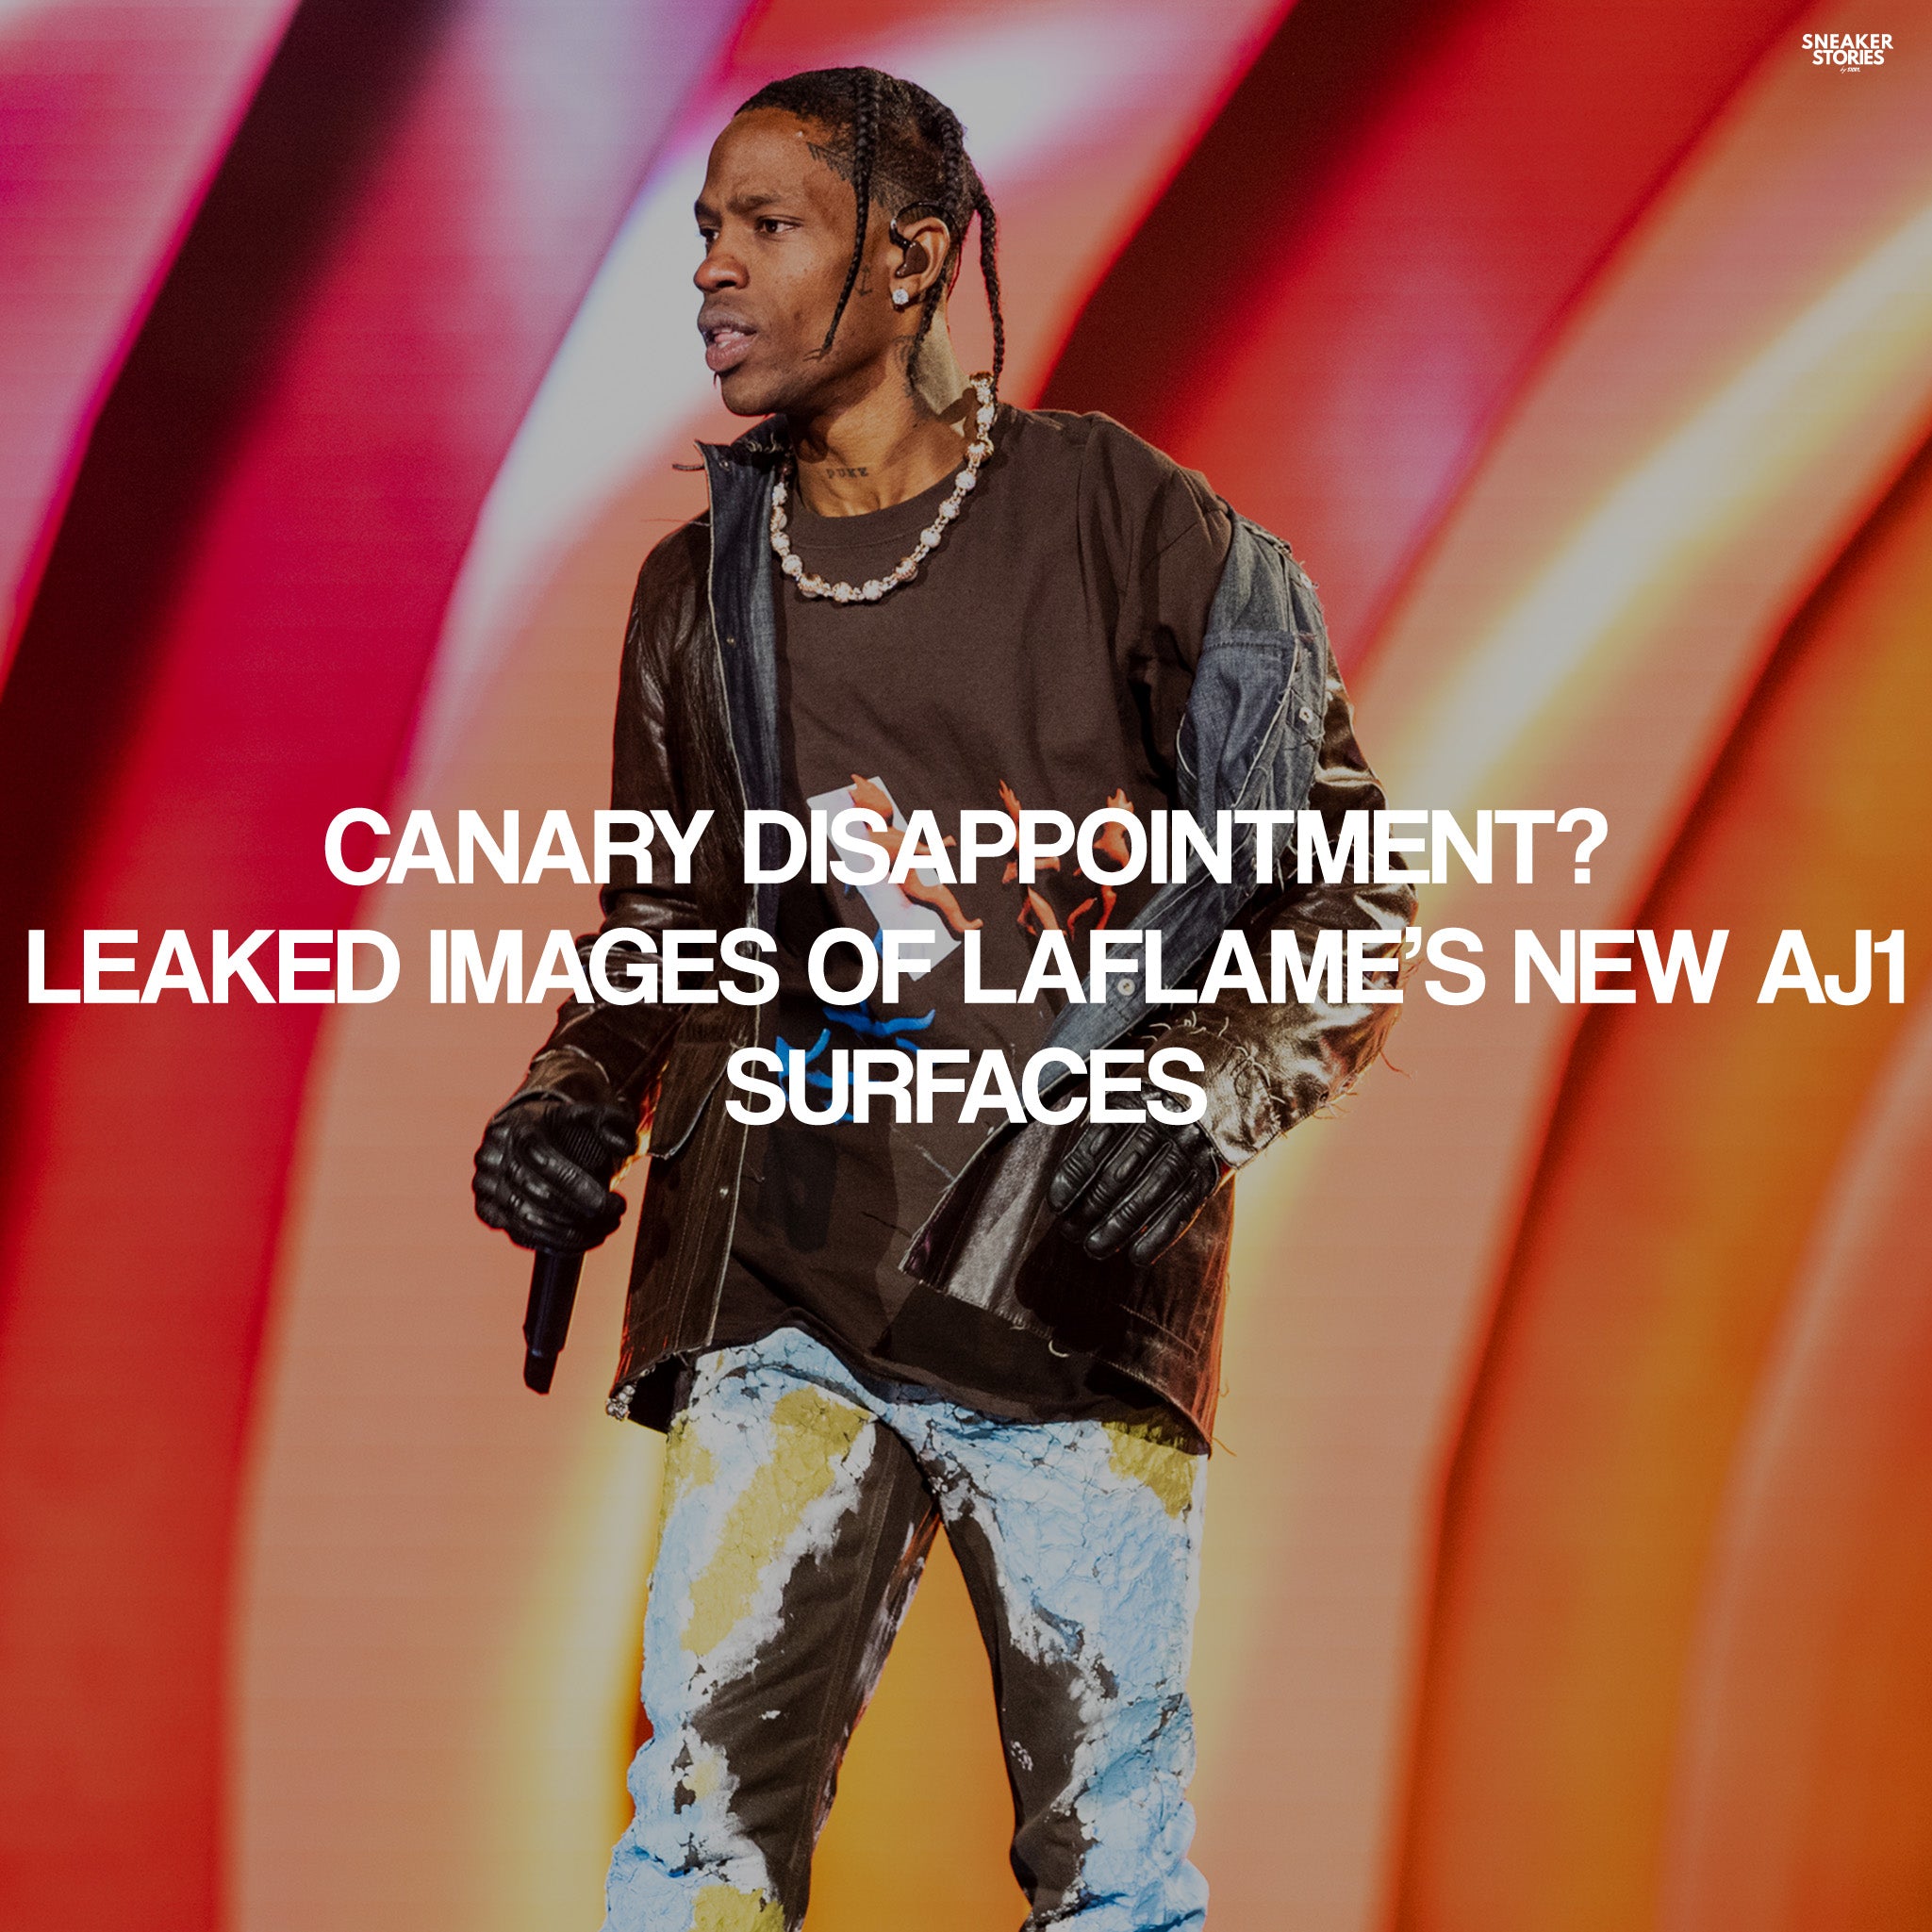 Canary Disappointment? Leaked images of Laflame’s new AJ1 surfaces